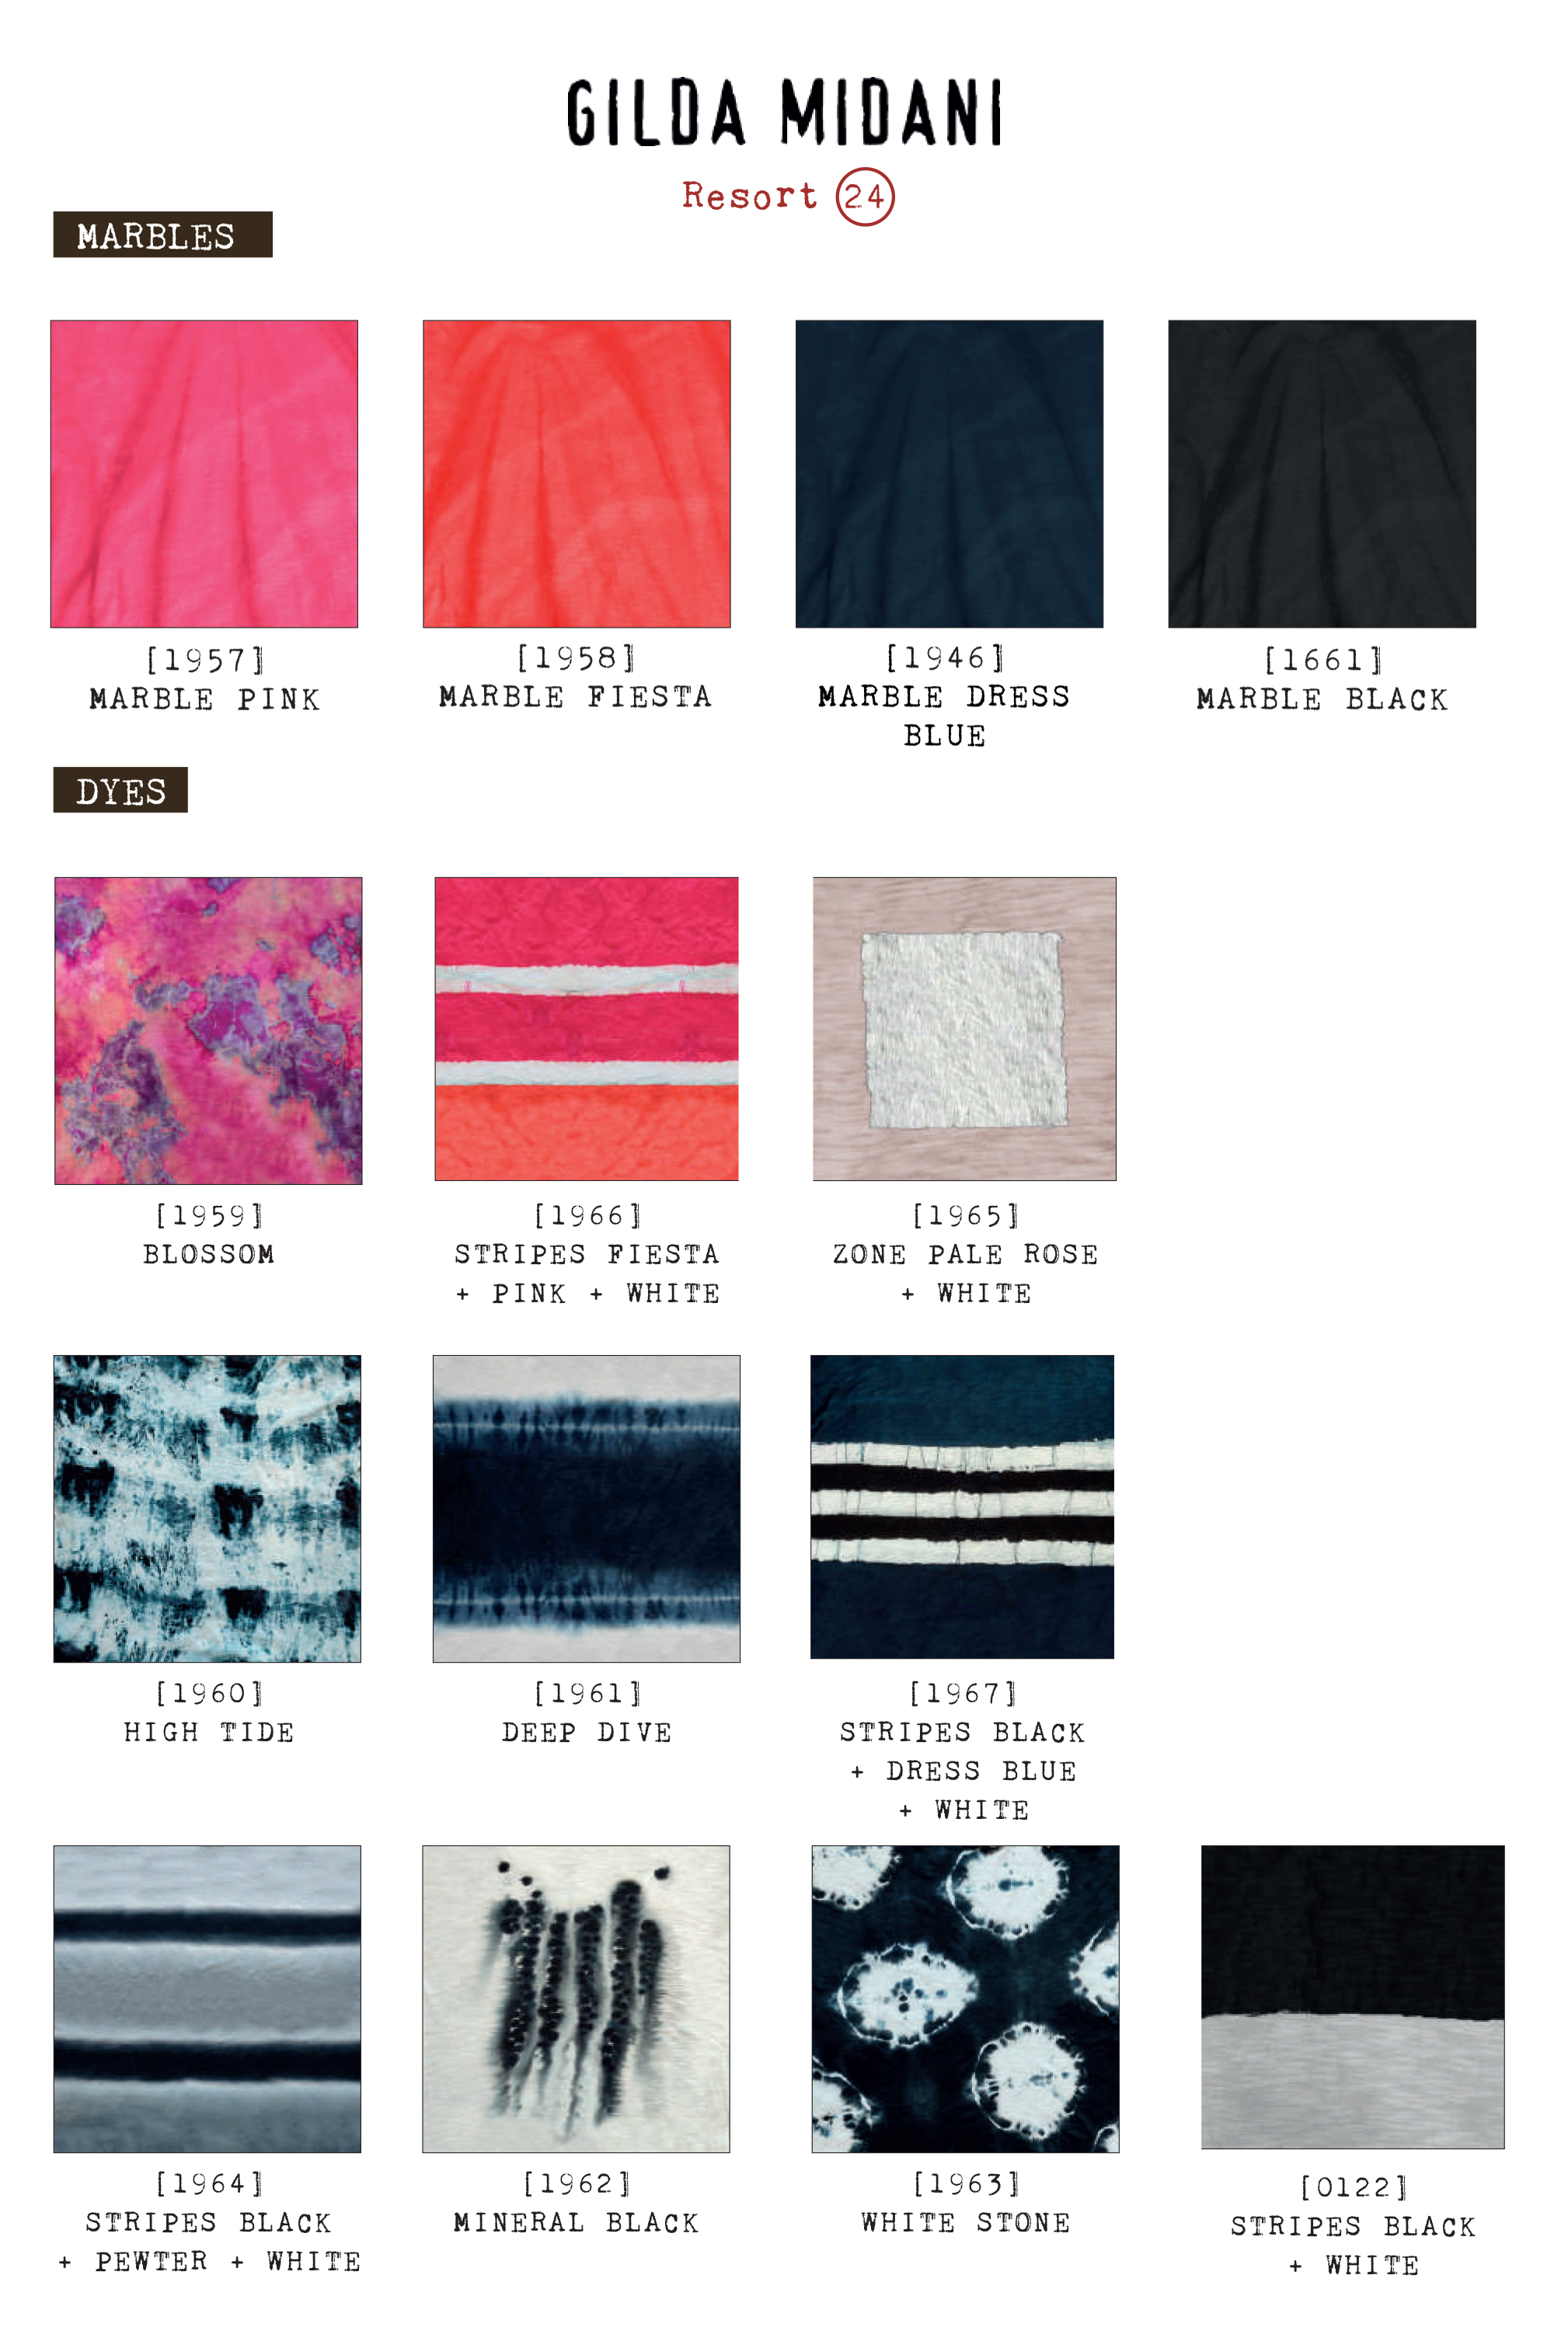 linesheet-NY-RESORT24-APROPO-01-compressed-4-AllColors.png